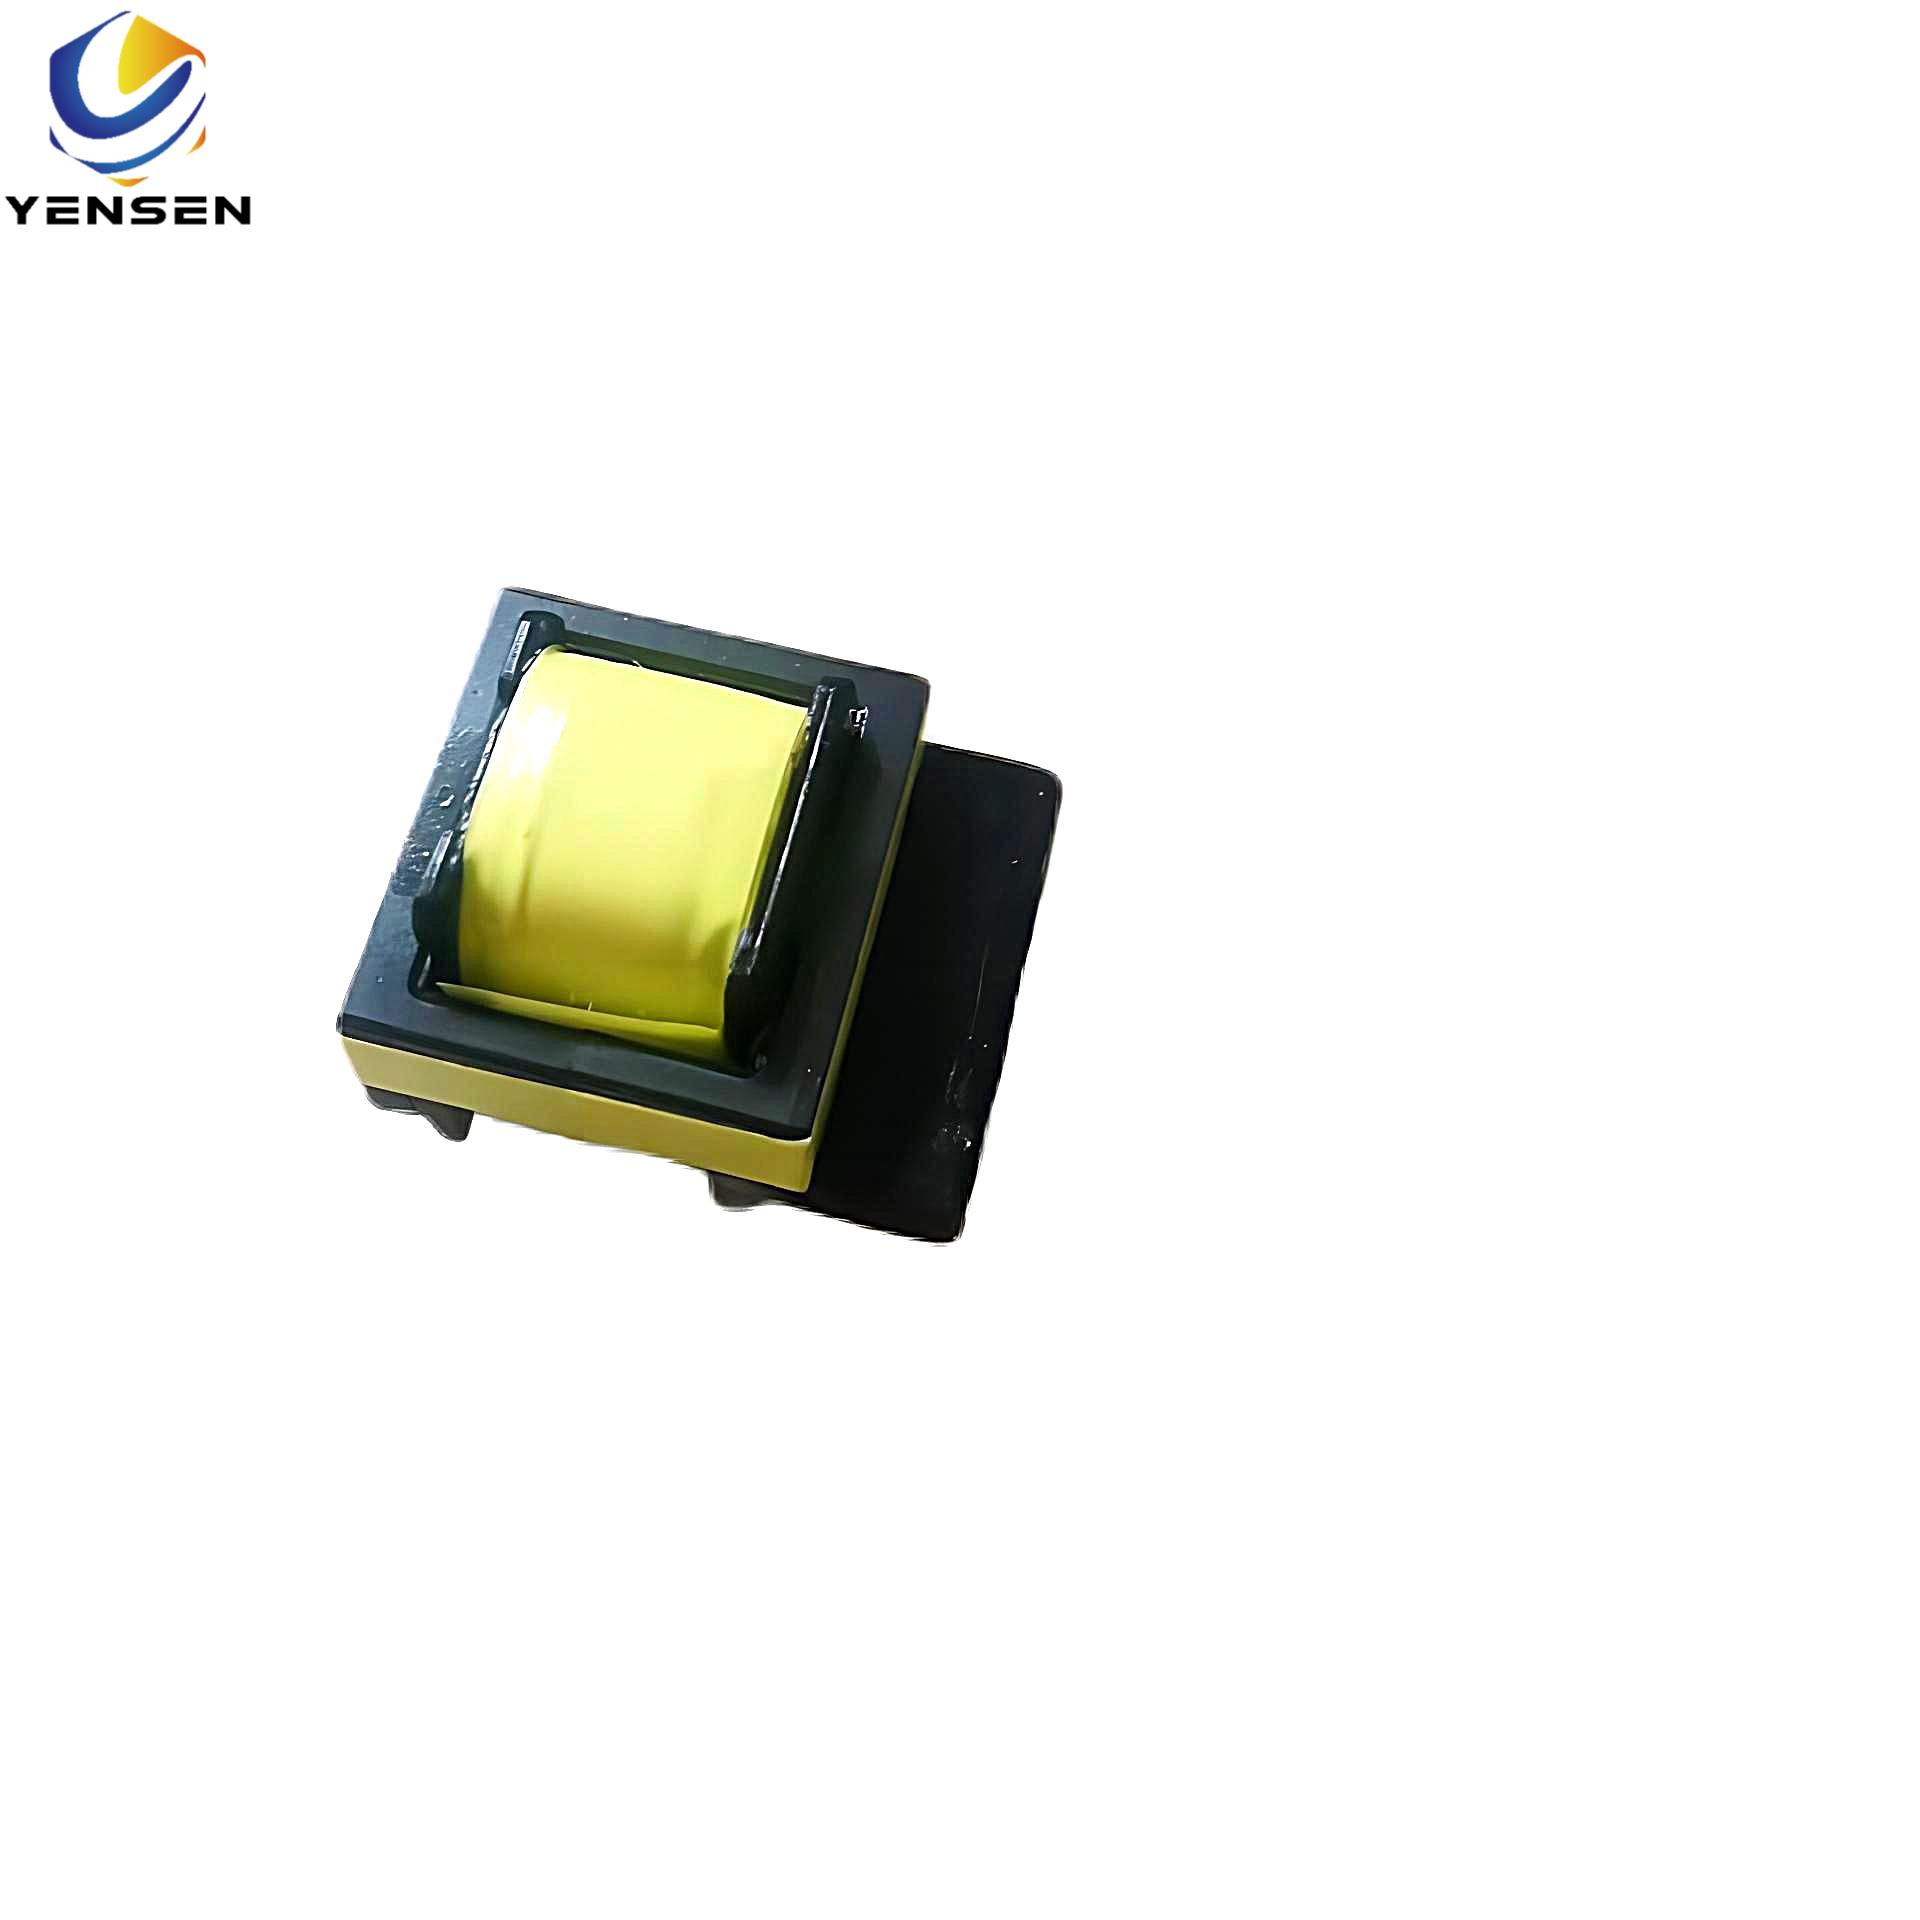 EEL19 Ferrite High frequency flyback transformer for SMPS